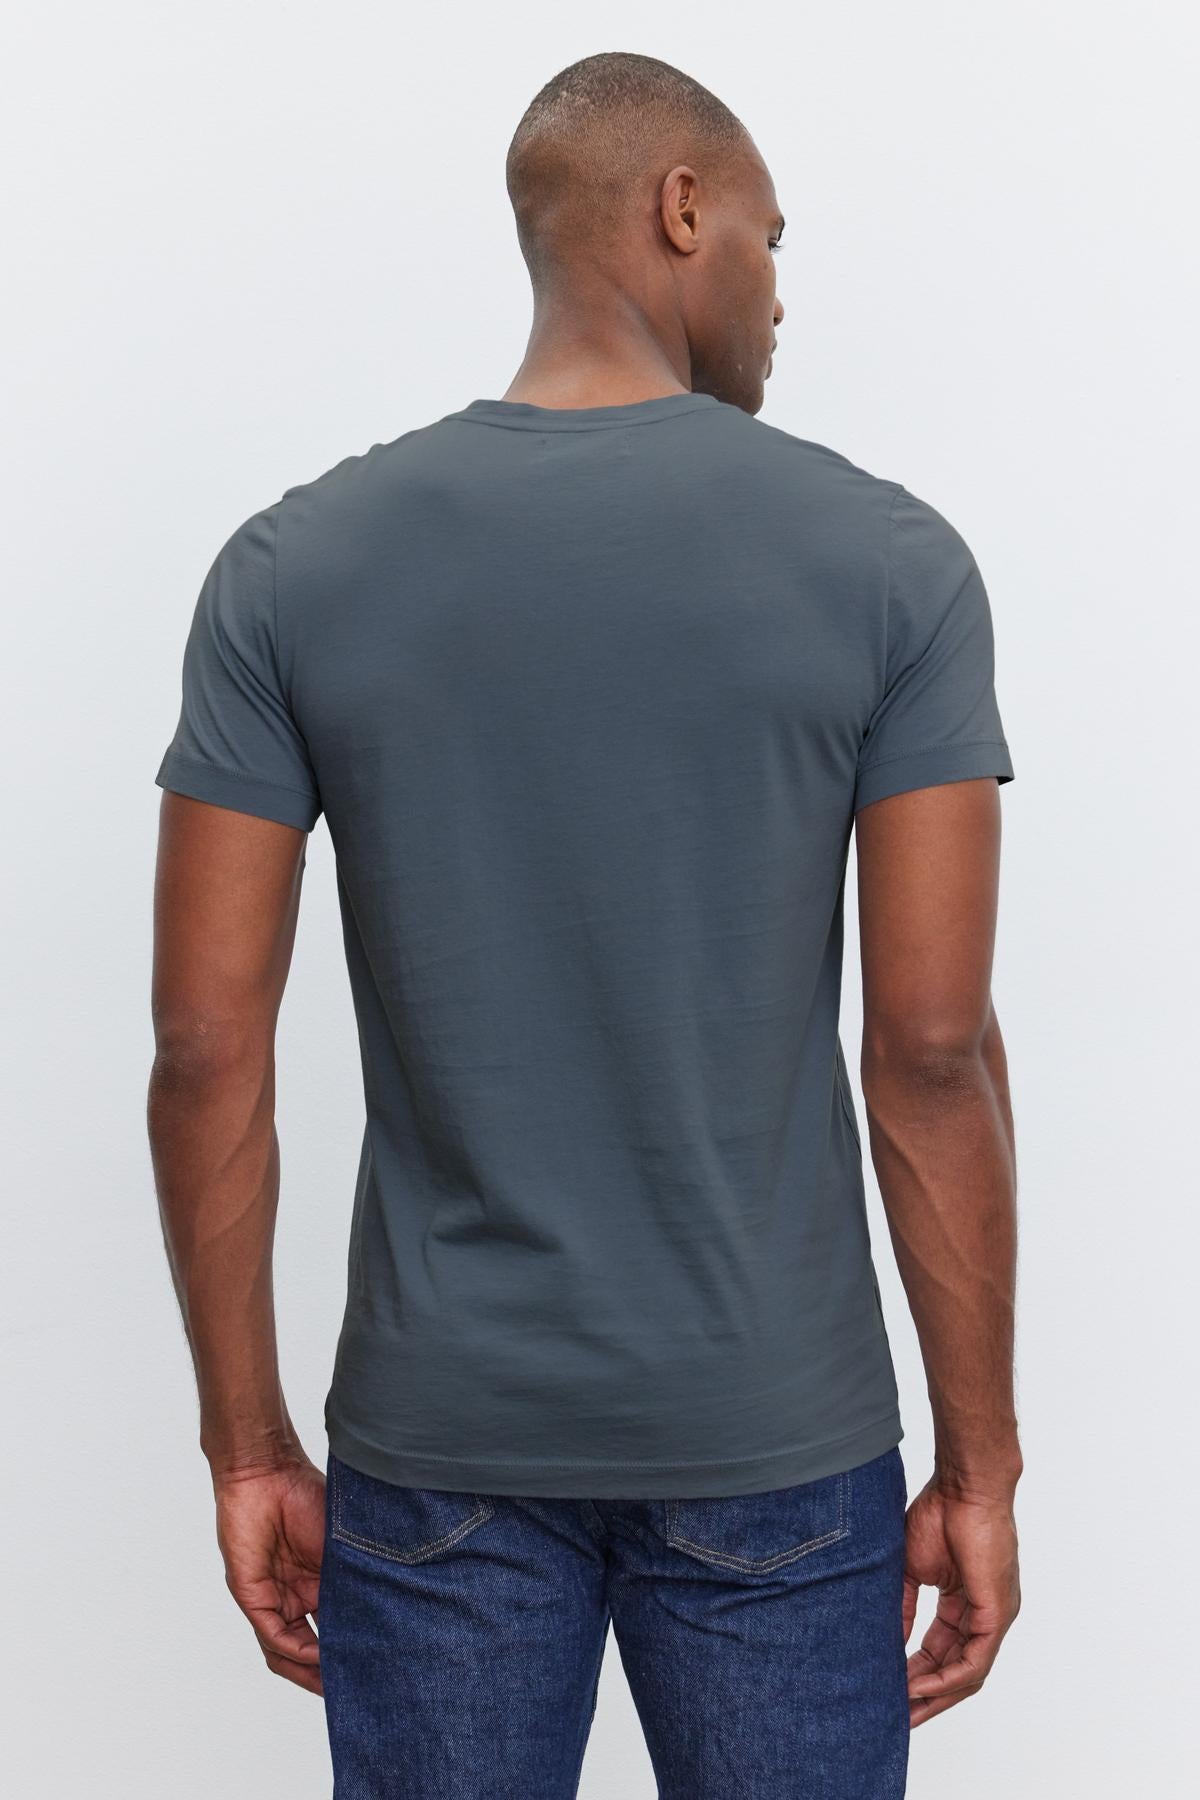 A person wearing a dark gray SAMSEN TEE by Velvet by Graham & Spencer and blue jeans is standing with their back to the camera.-37386135503041